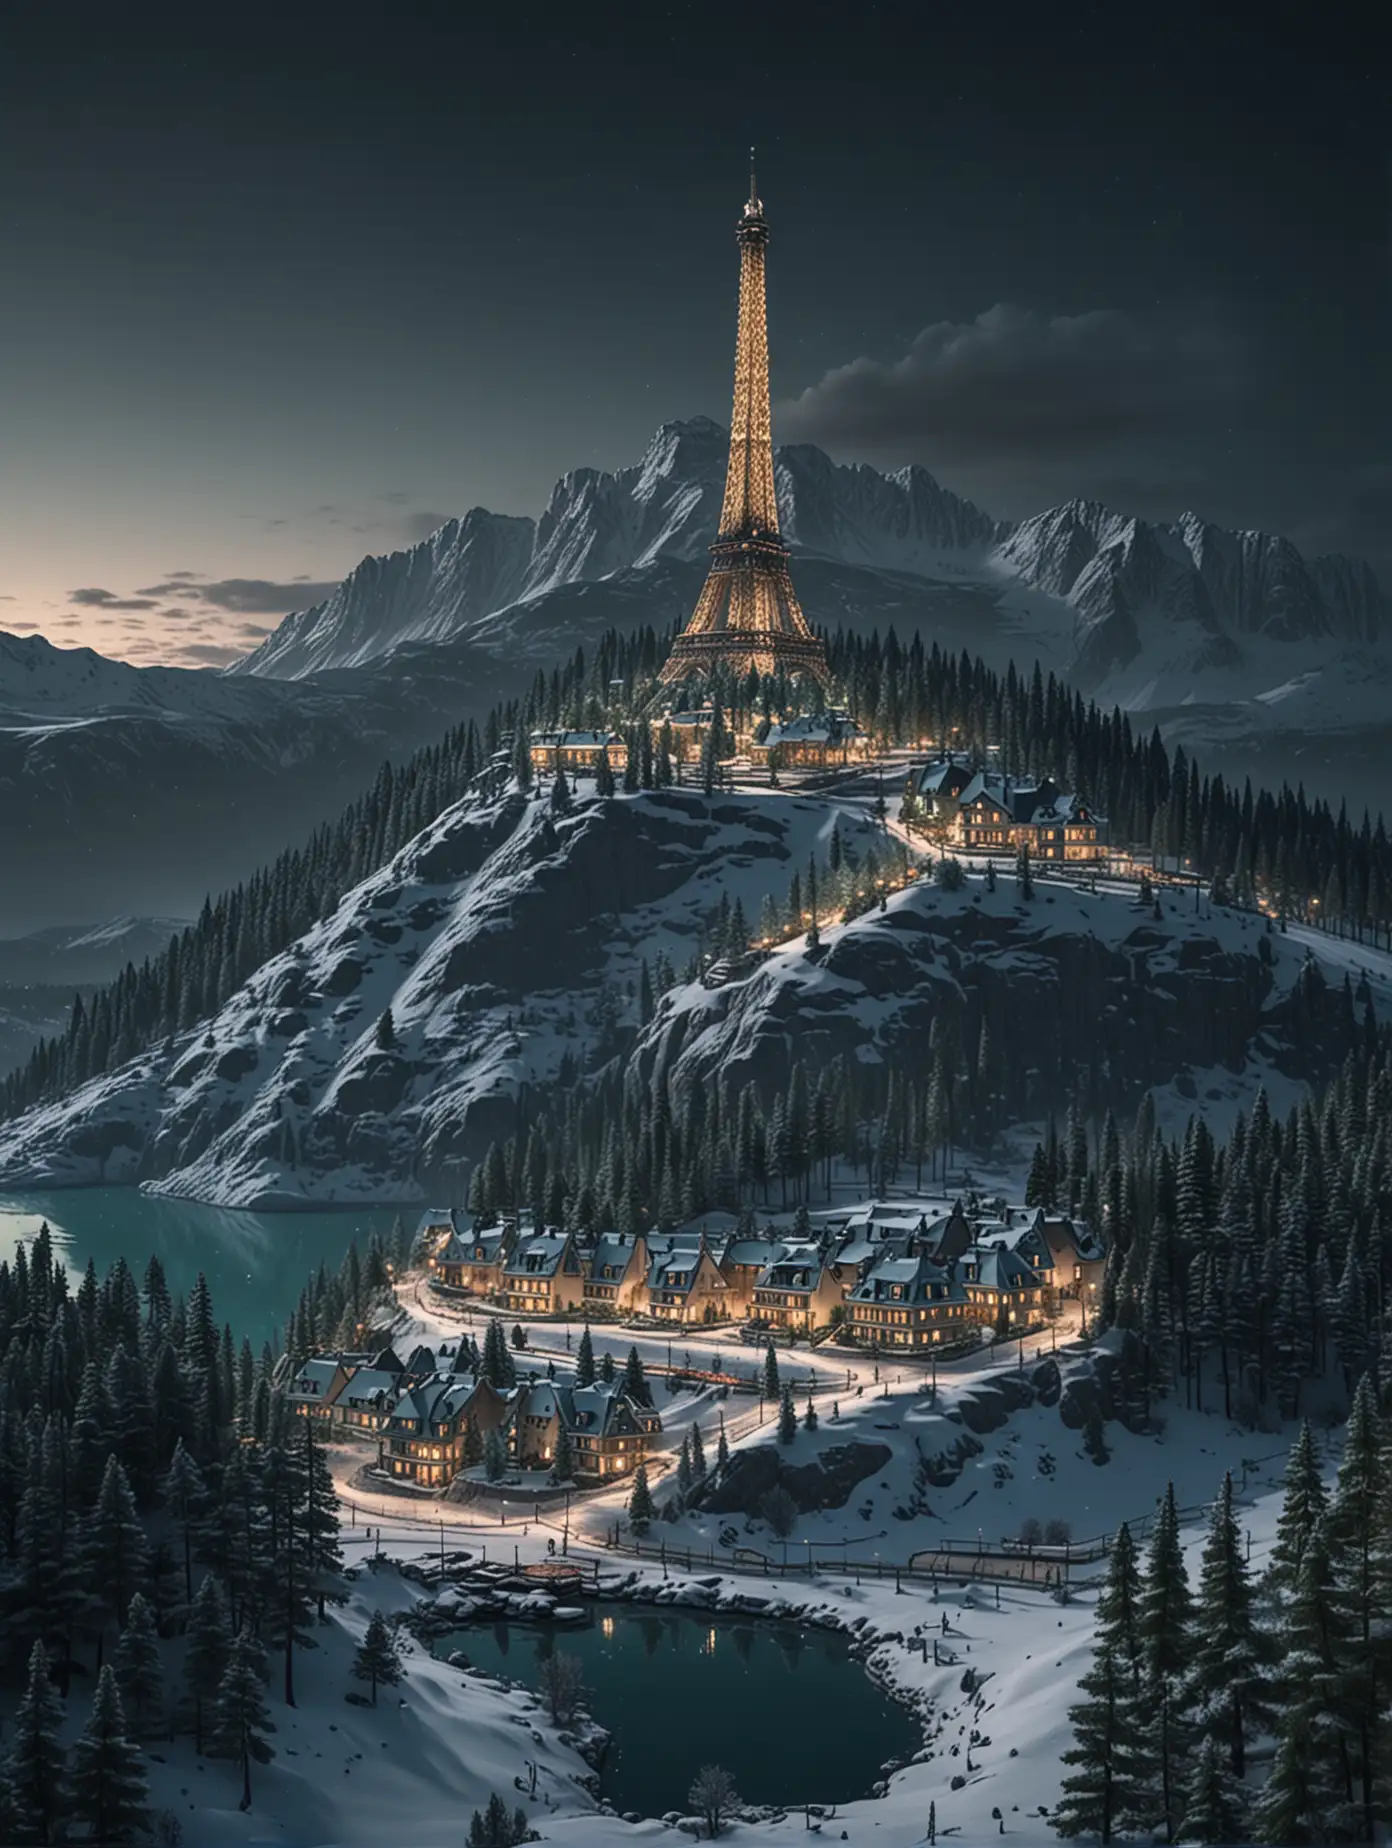 Snow Mountain Landscape with Pine Trees Lighted Houses and Eiffel Tower Silhouette